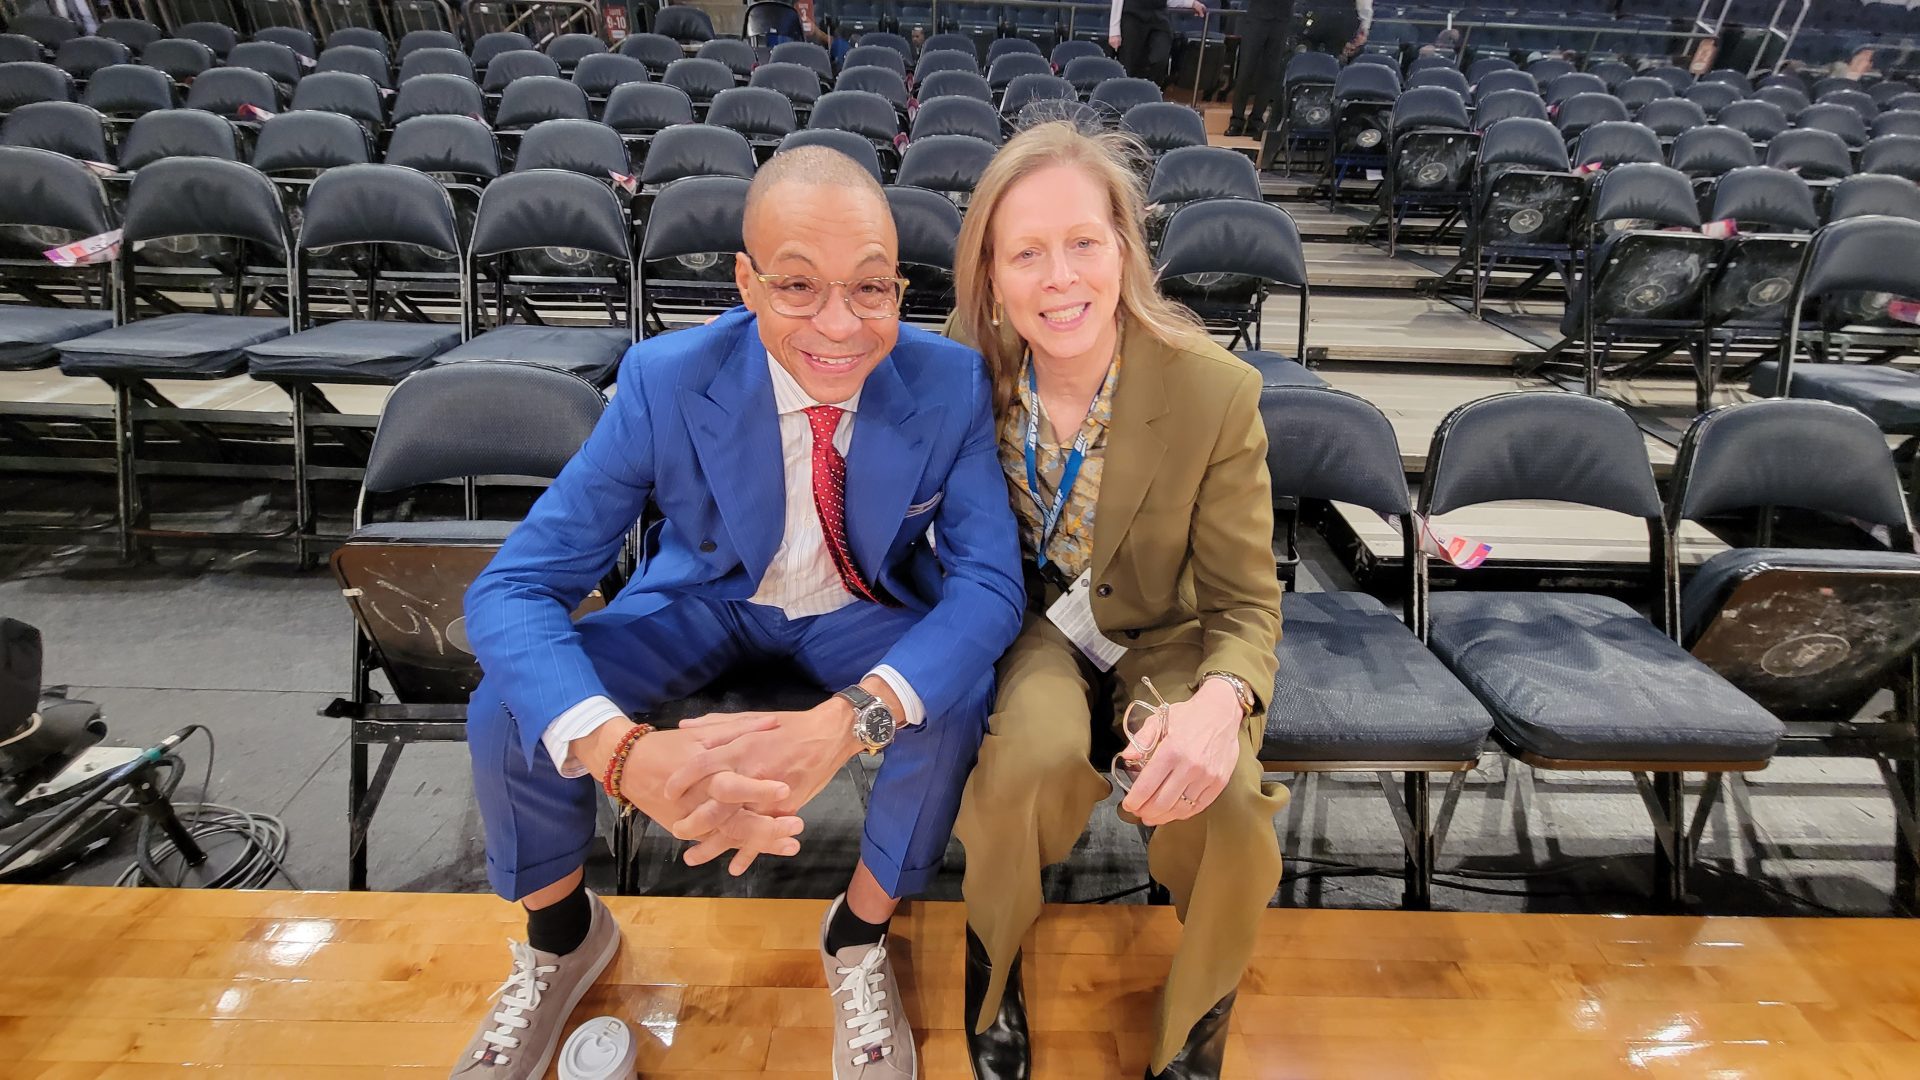 Fox Sports play-by-play announcer Gus Johnson with Big East Conference commissioner Val Ackerman. (Photo by Derrel Jazz Johnson for rolling out.)